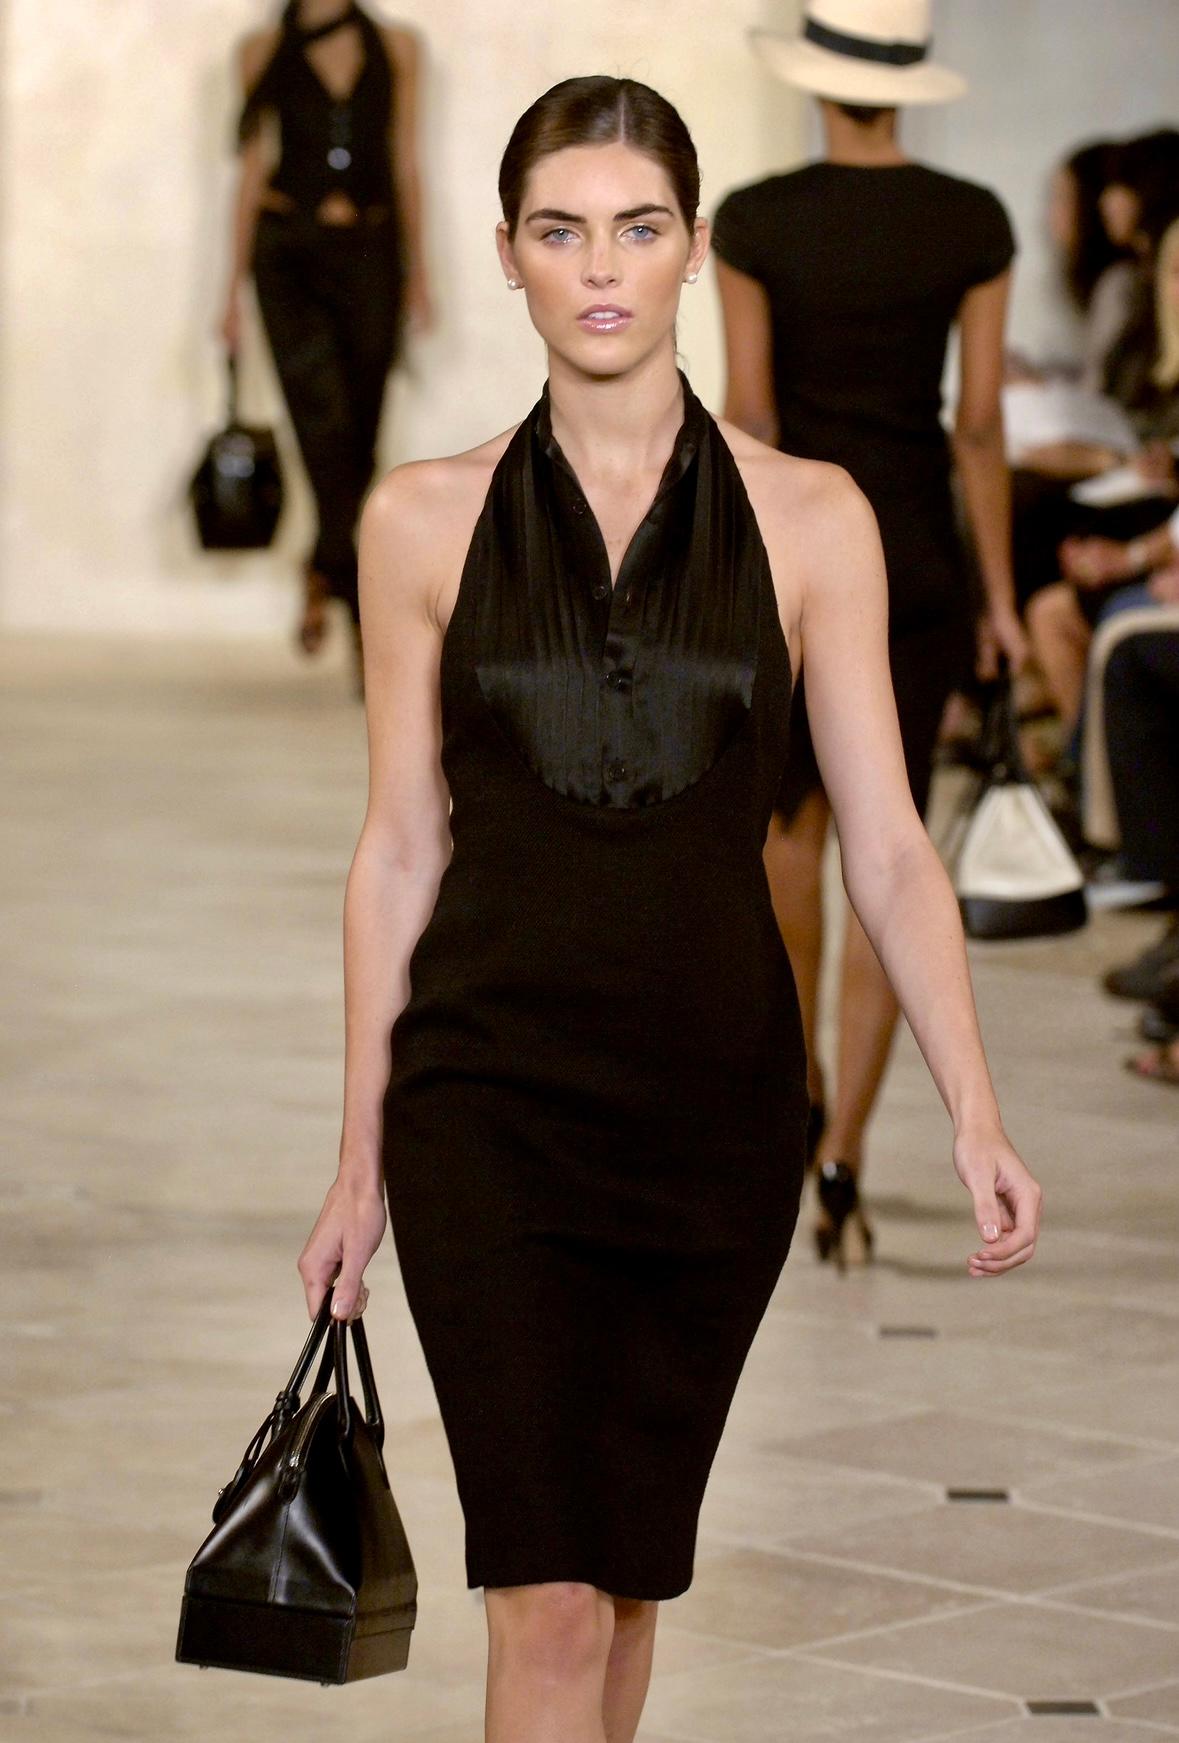 This stunning Ralph Lauren Purple Label halterneck mini dress from the Spring/Summer 2007 collection is the perfect modern yet sophisticated little black dress. This chic dress debuted on the season's runway as look 13, modeled by Hilary Rhoda, and